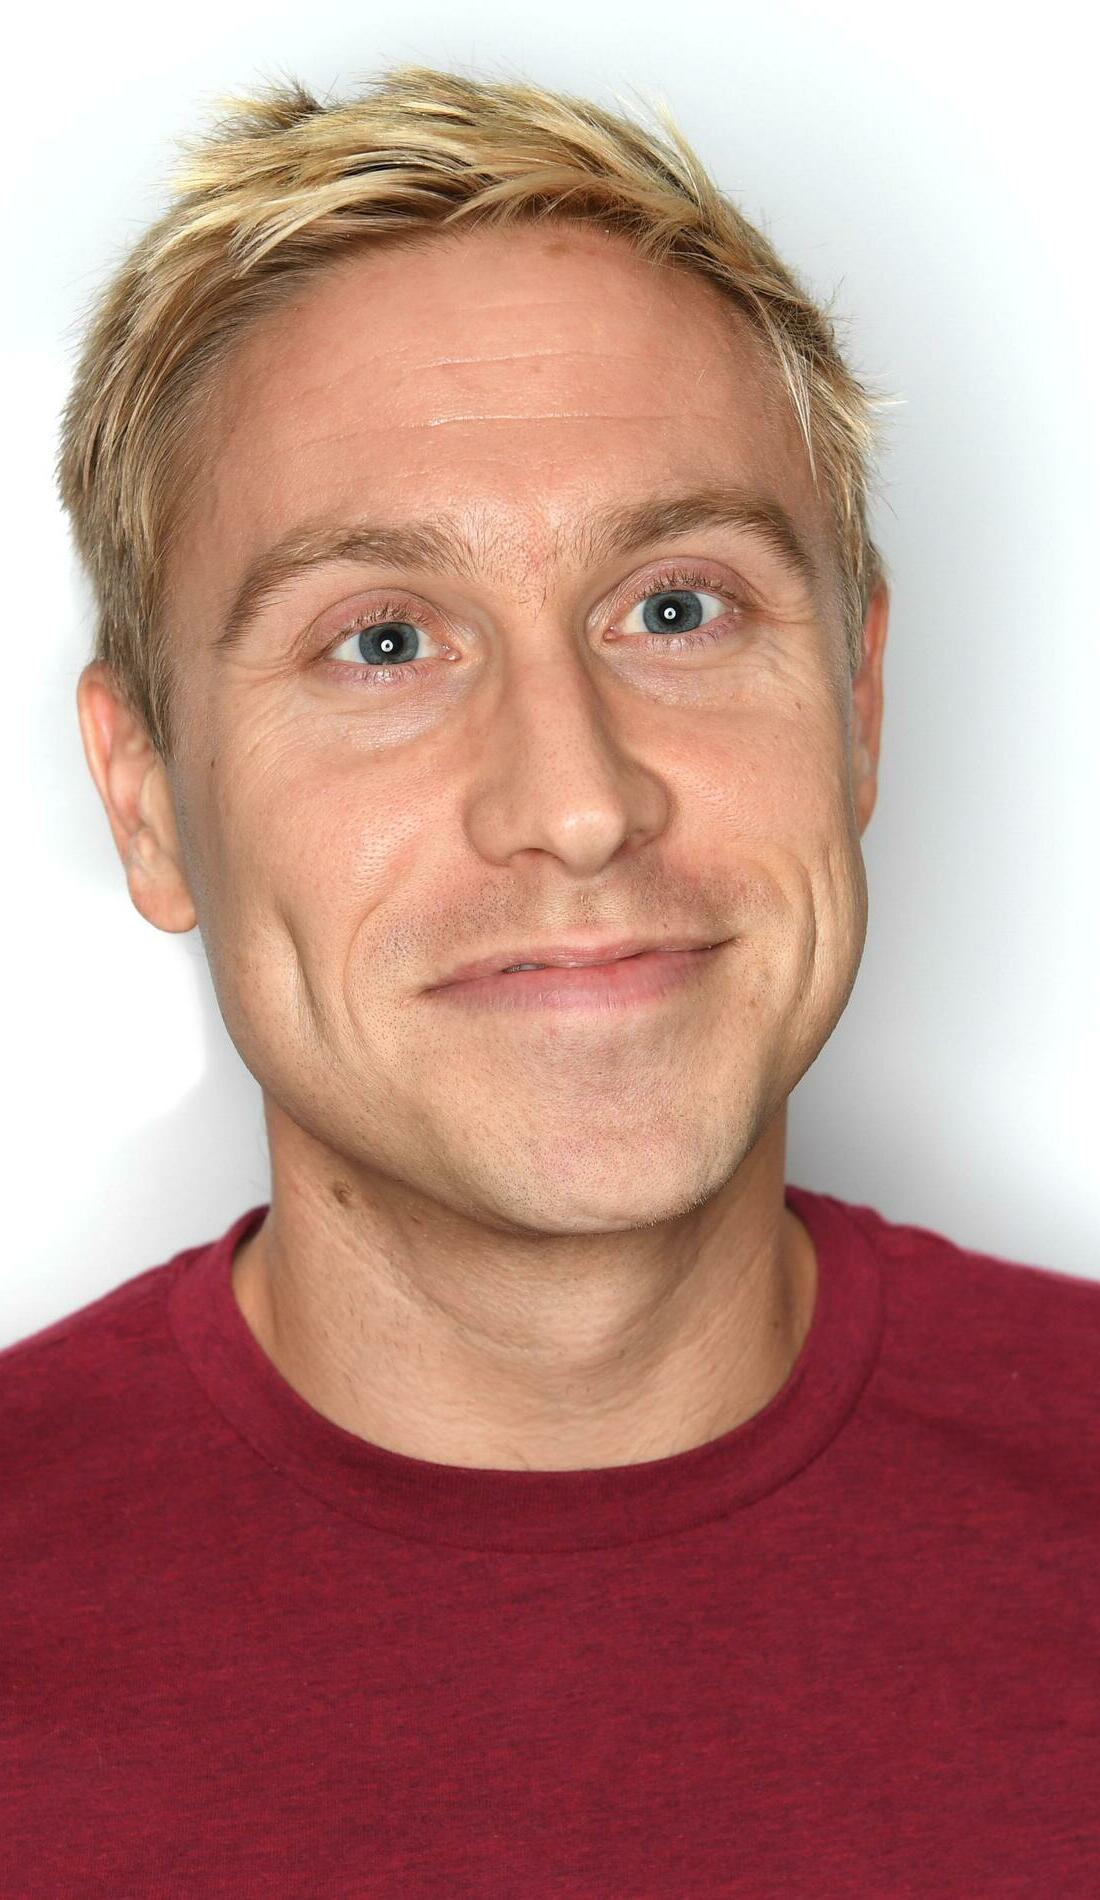 A Russell Howard live event